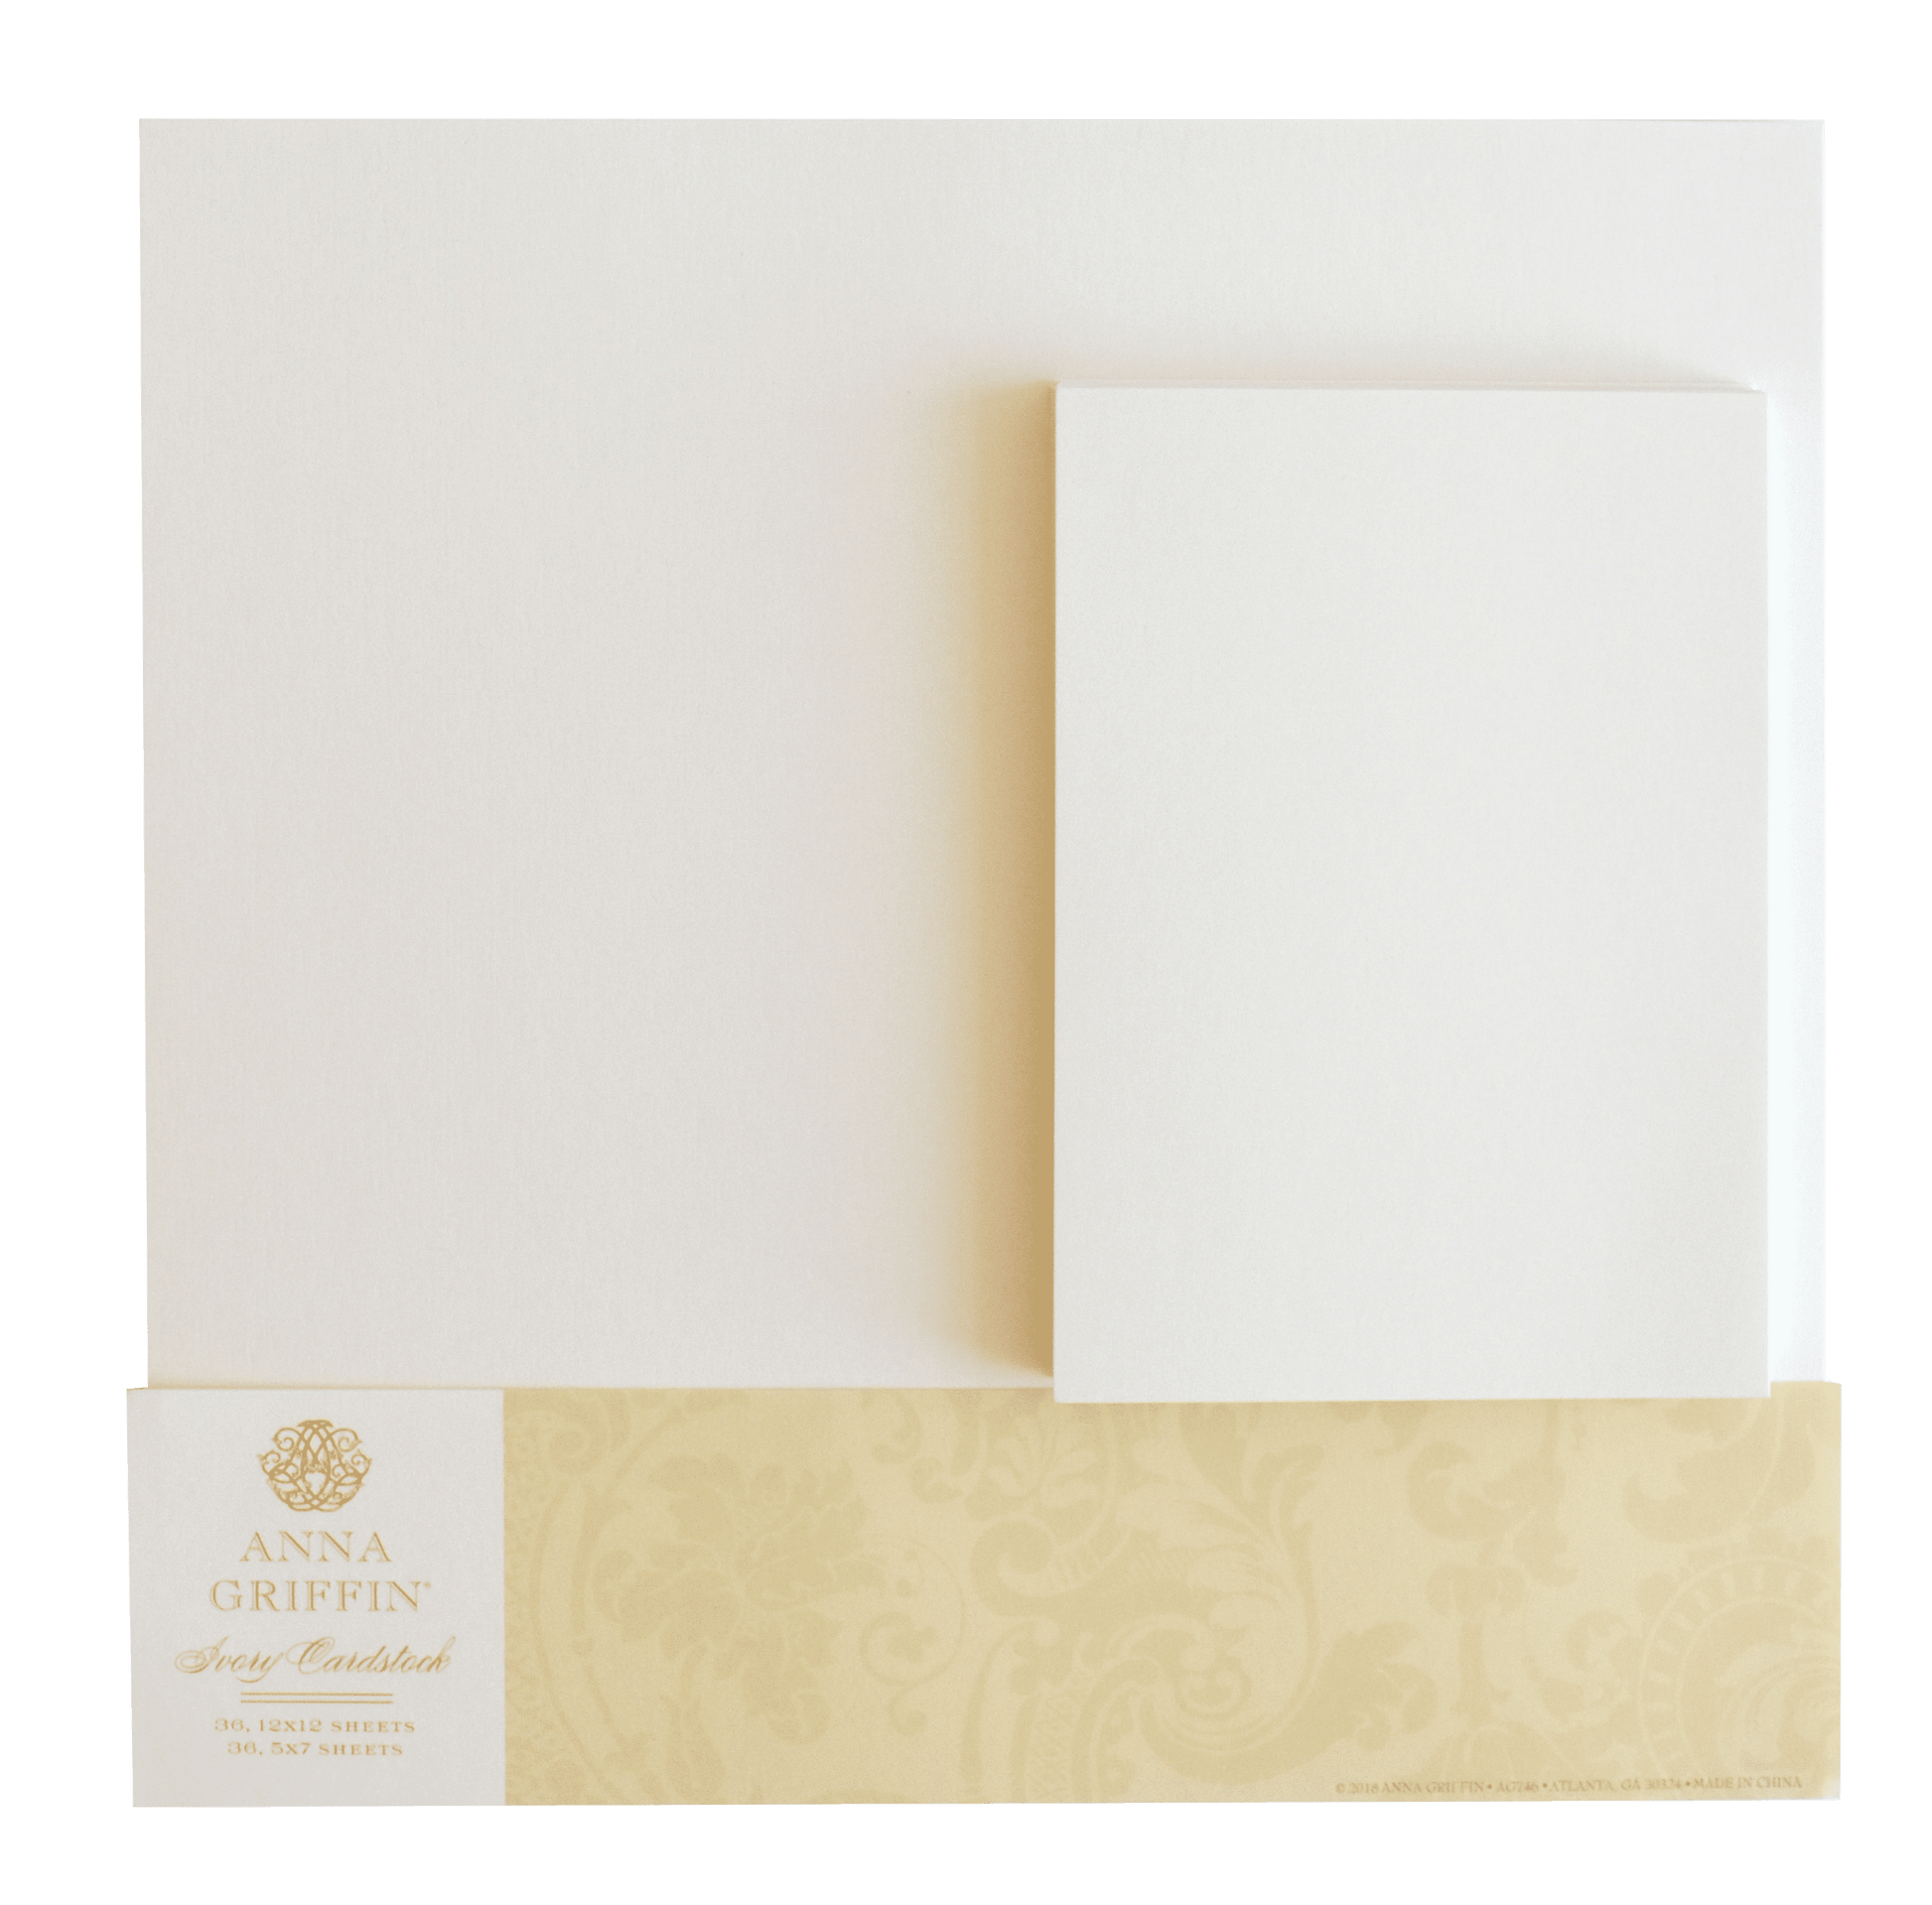 Ivory 12-x-12 50 per package, 270 GSM (100lb Cover) Curious SKIN Paper